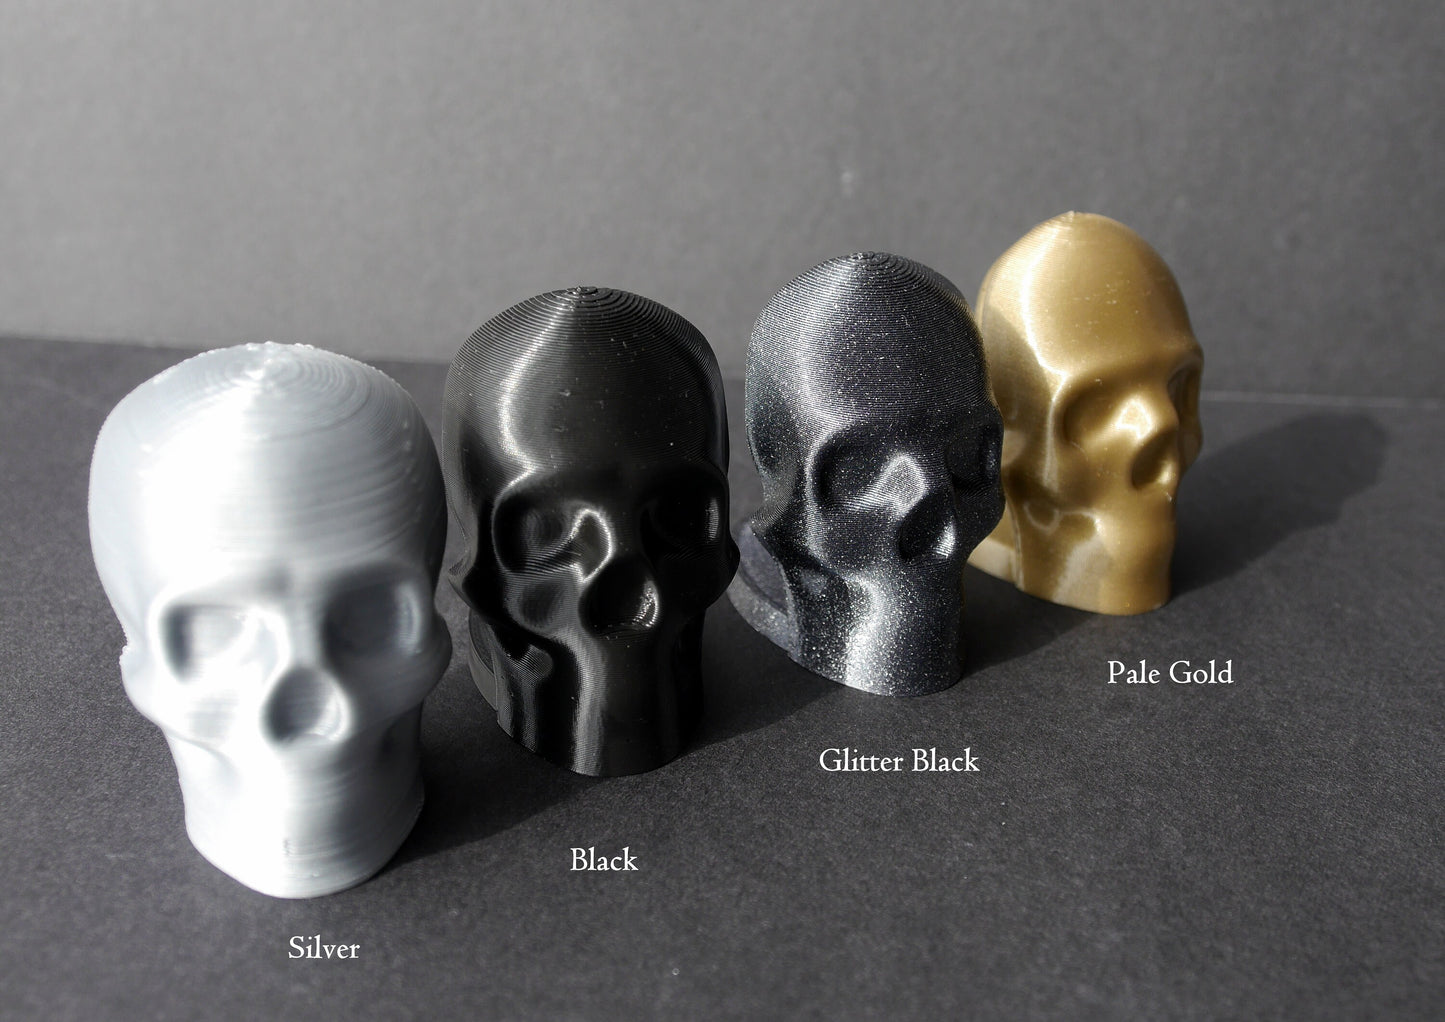 3D Gothic Black Skull Shaped Place Card Holders